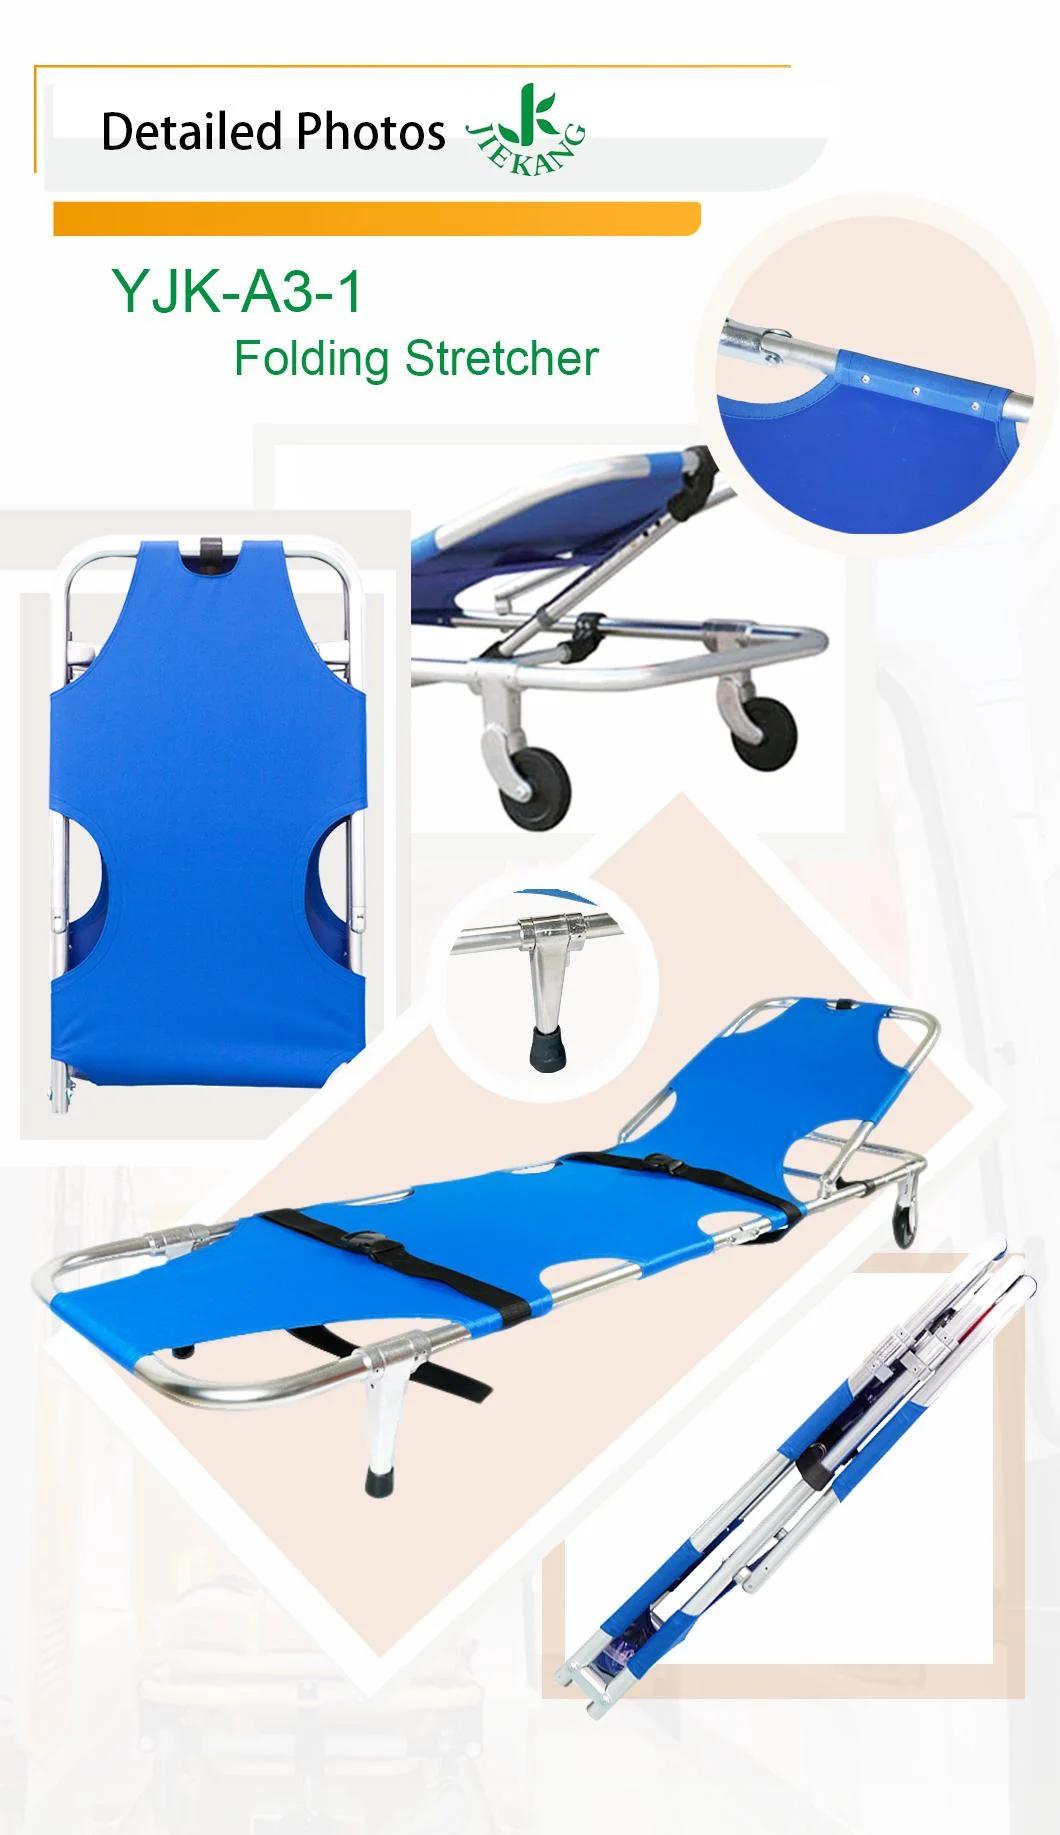 High Quality Aluminum Alloy Medical First Aid Emergency Foldable Stretcher